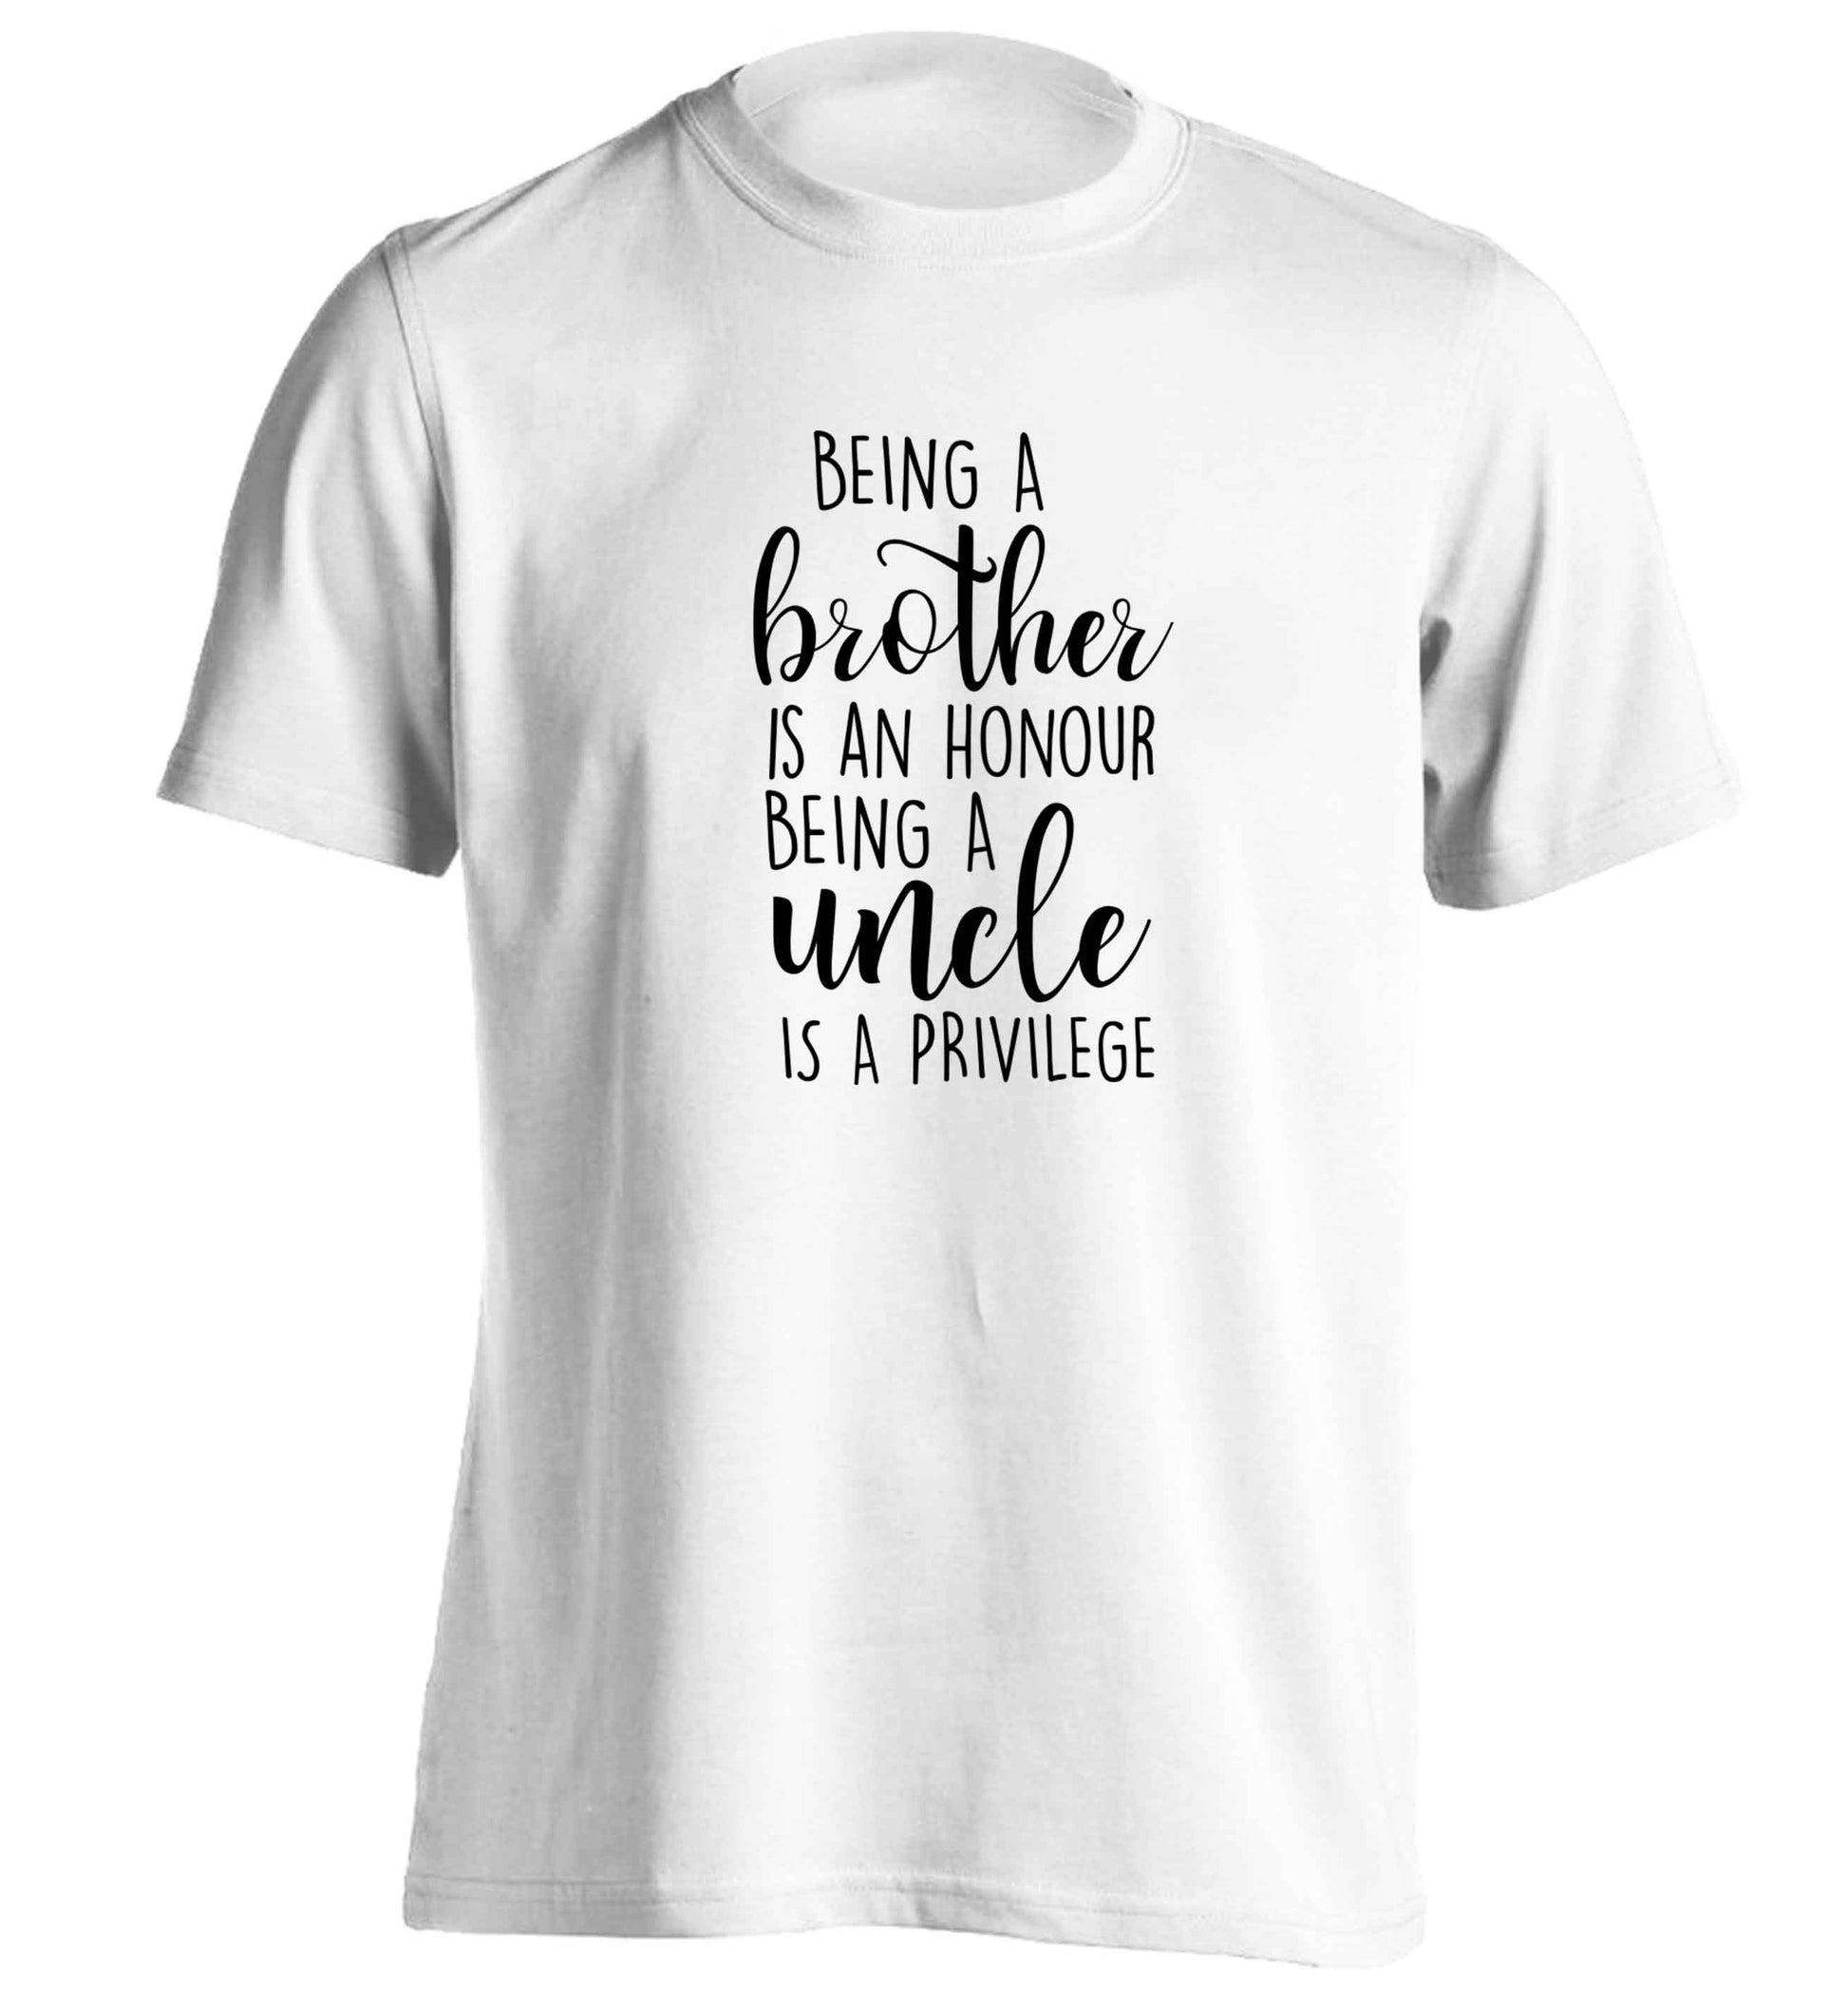 Being a brother is an honour being an uncle is a privilege adults unisex white Tshirt 2XL